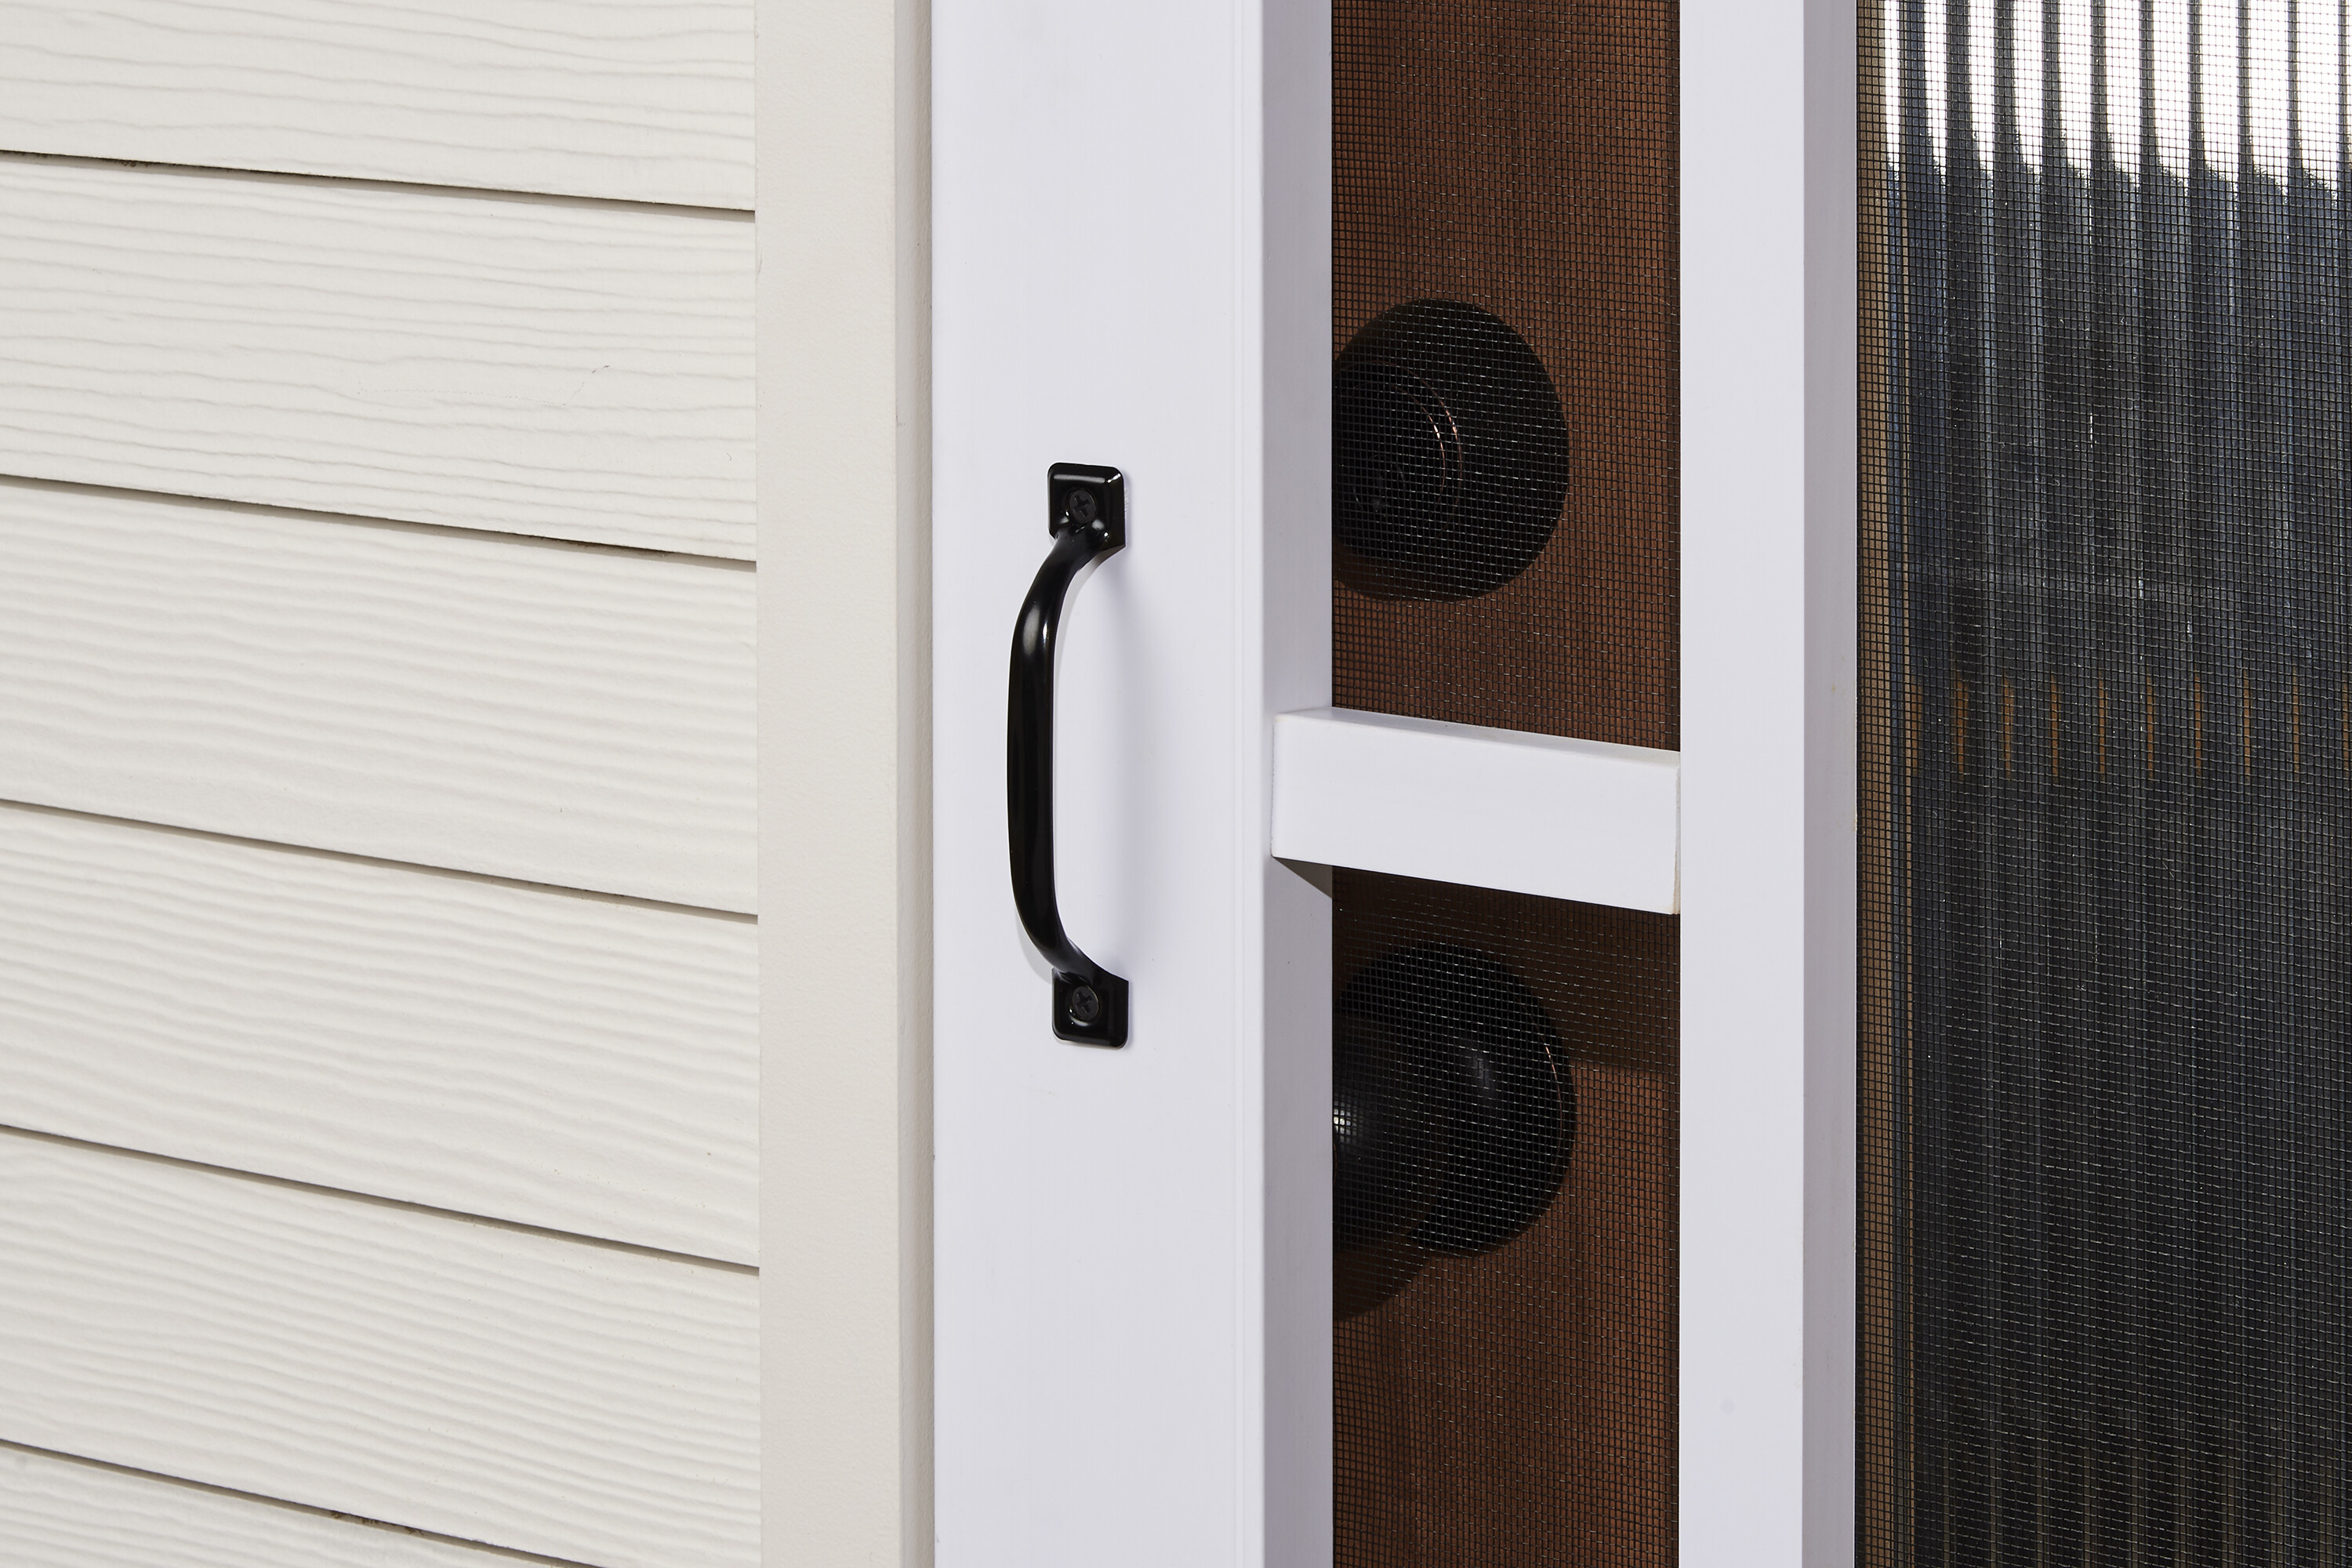 Wright Products V434BL has a 4-3/4 PULL HANDLE BLACK Hampton Products